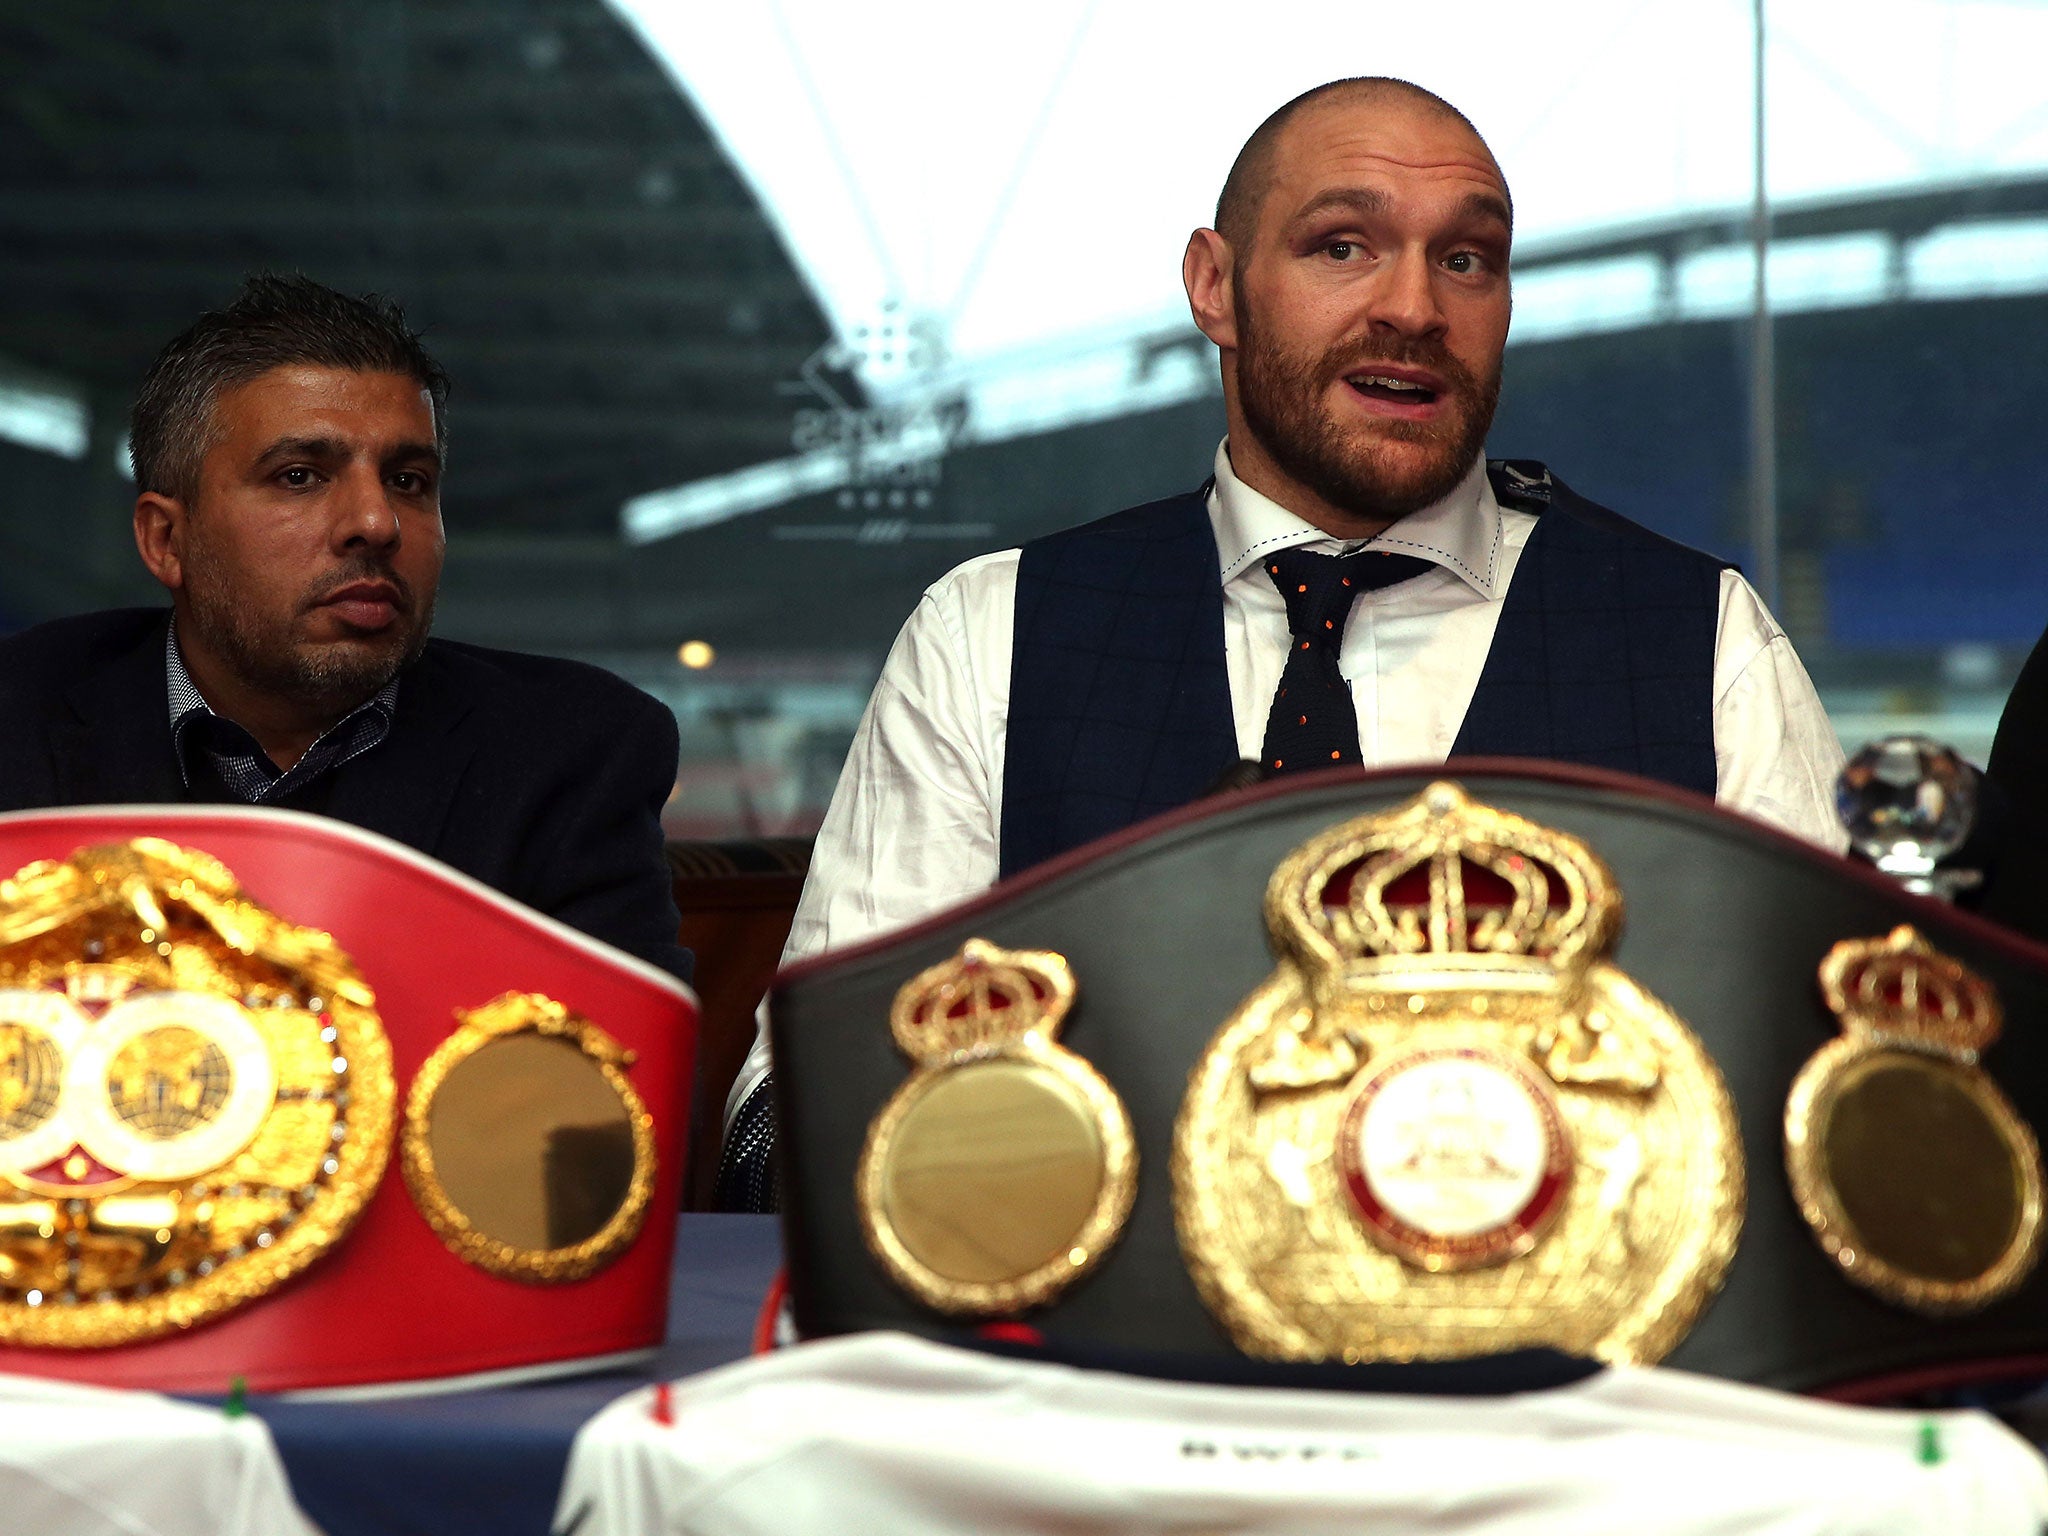 World heavyweight boxing champion Tyson Fury could be stripped of the IBF title